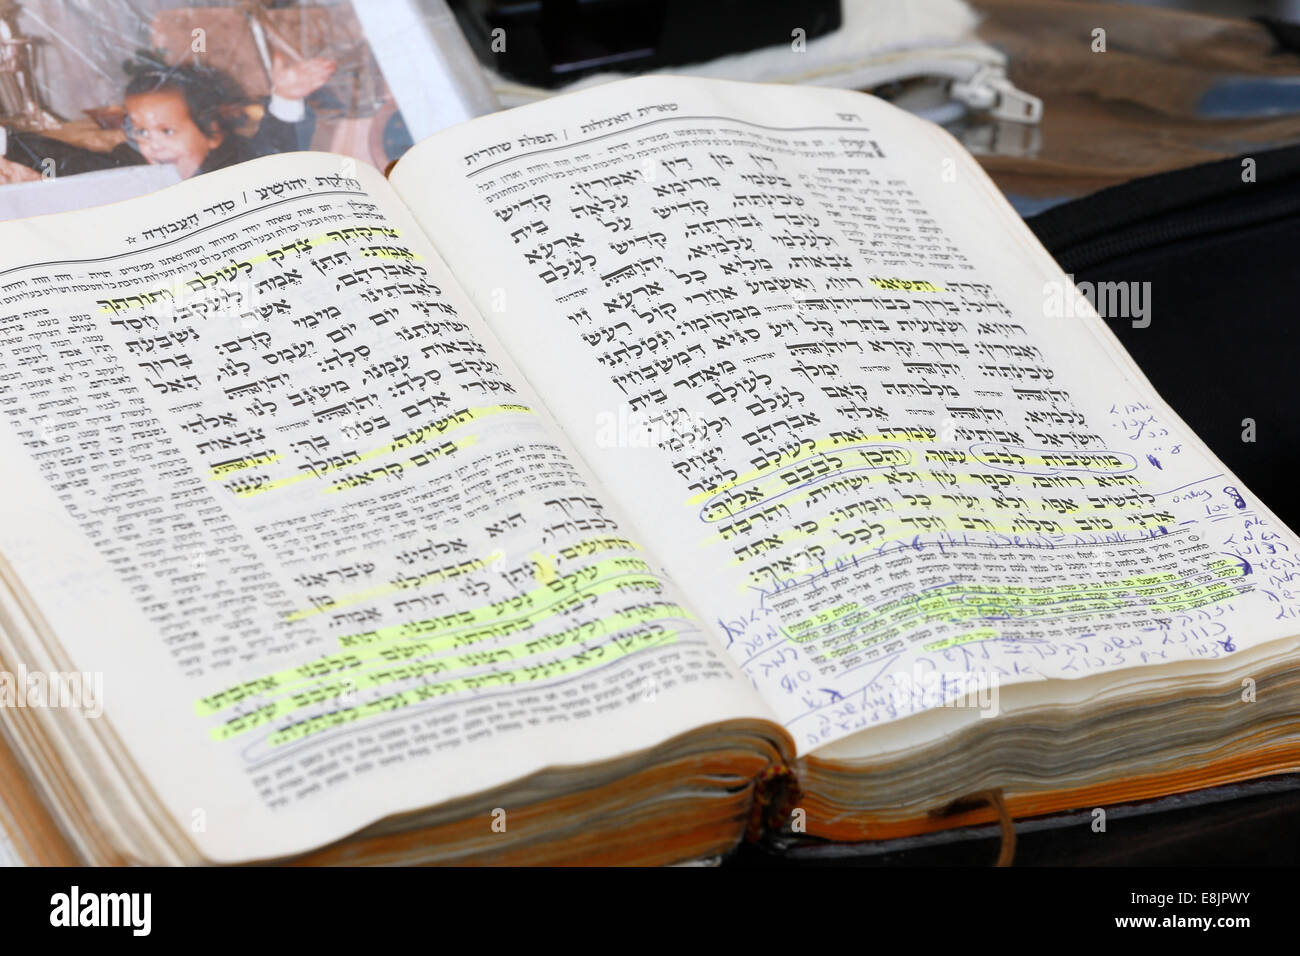 A page of the talmud. Stock Photo